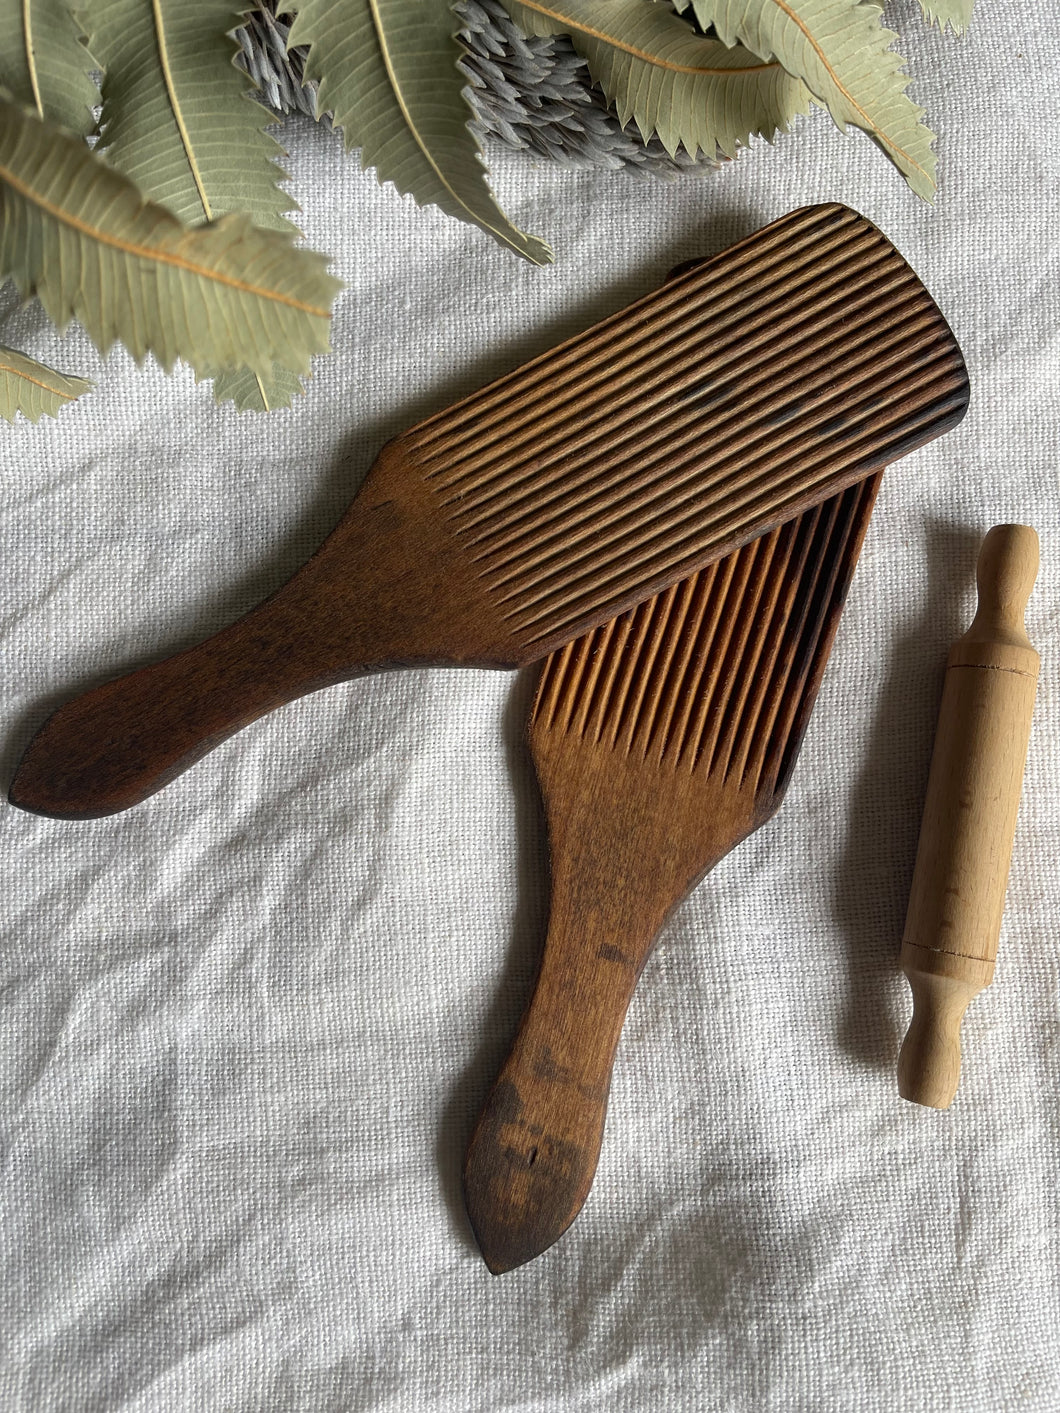 Antique Pair Of Butter Pats & Mini Rolling Pin.